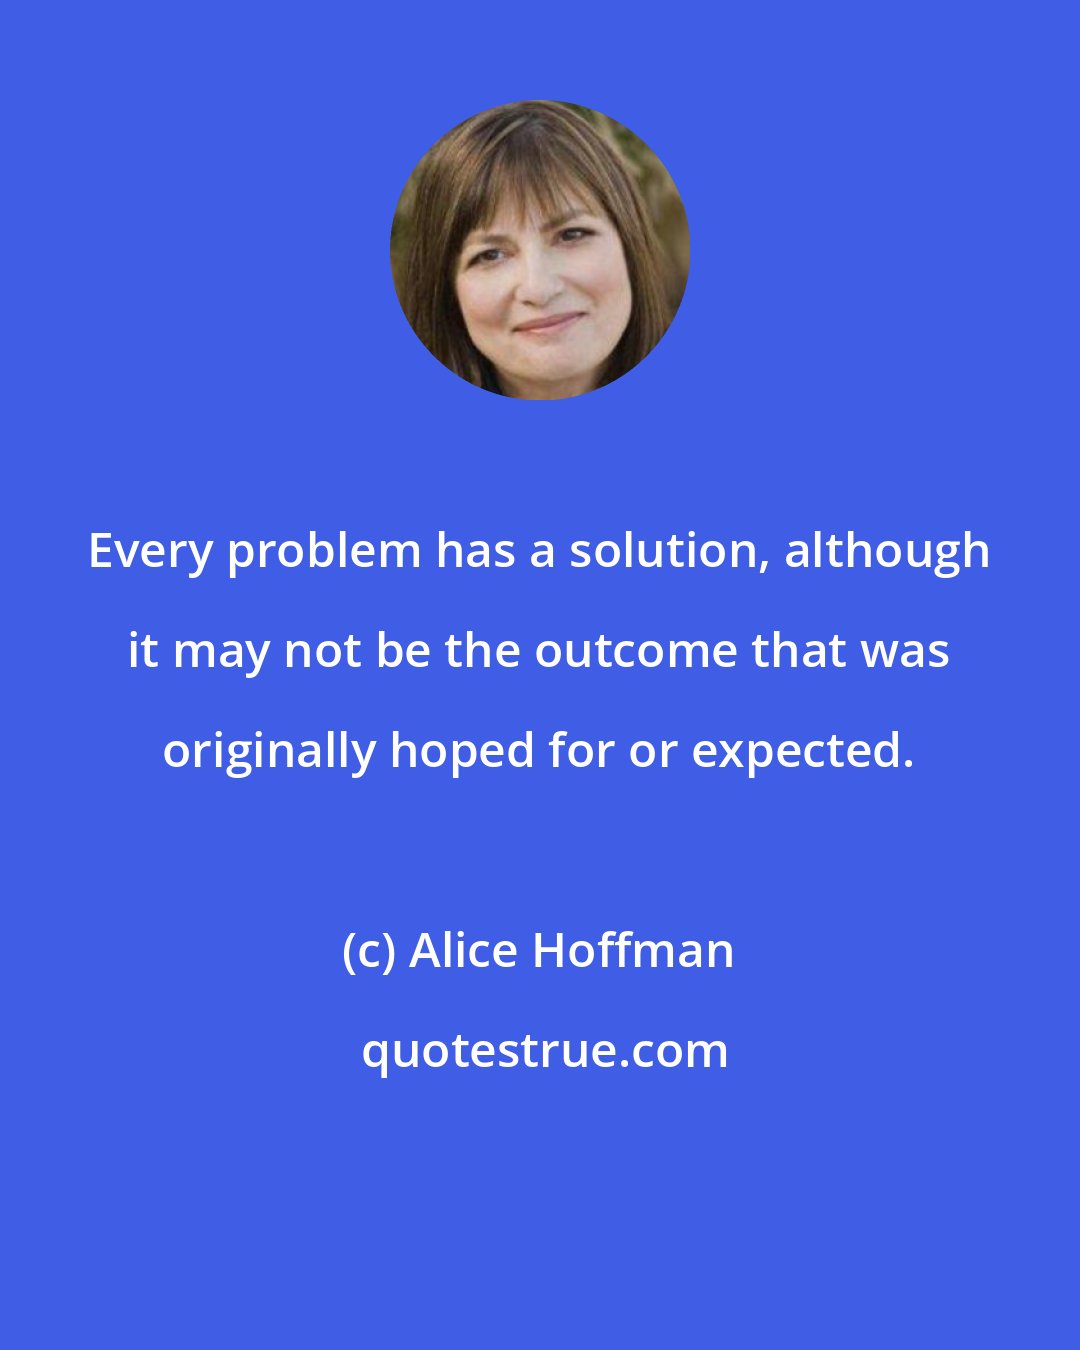 Alice Hoffman: Every problem has a solution, although it may not be the outcome that was originally hoped for or expected.